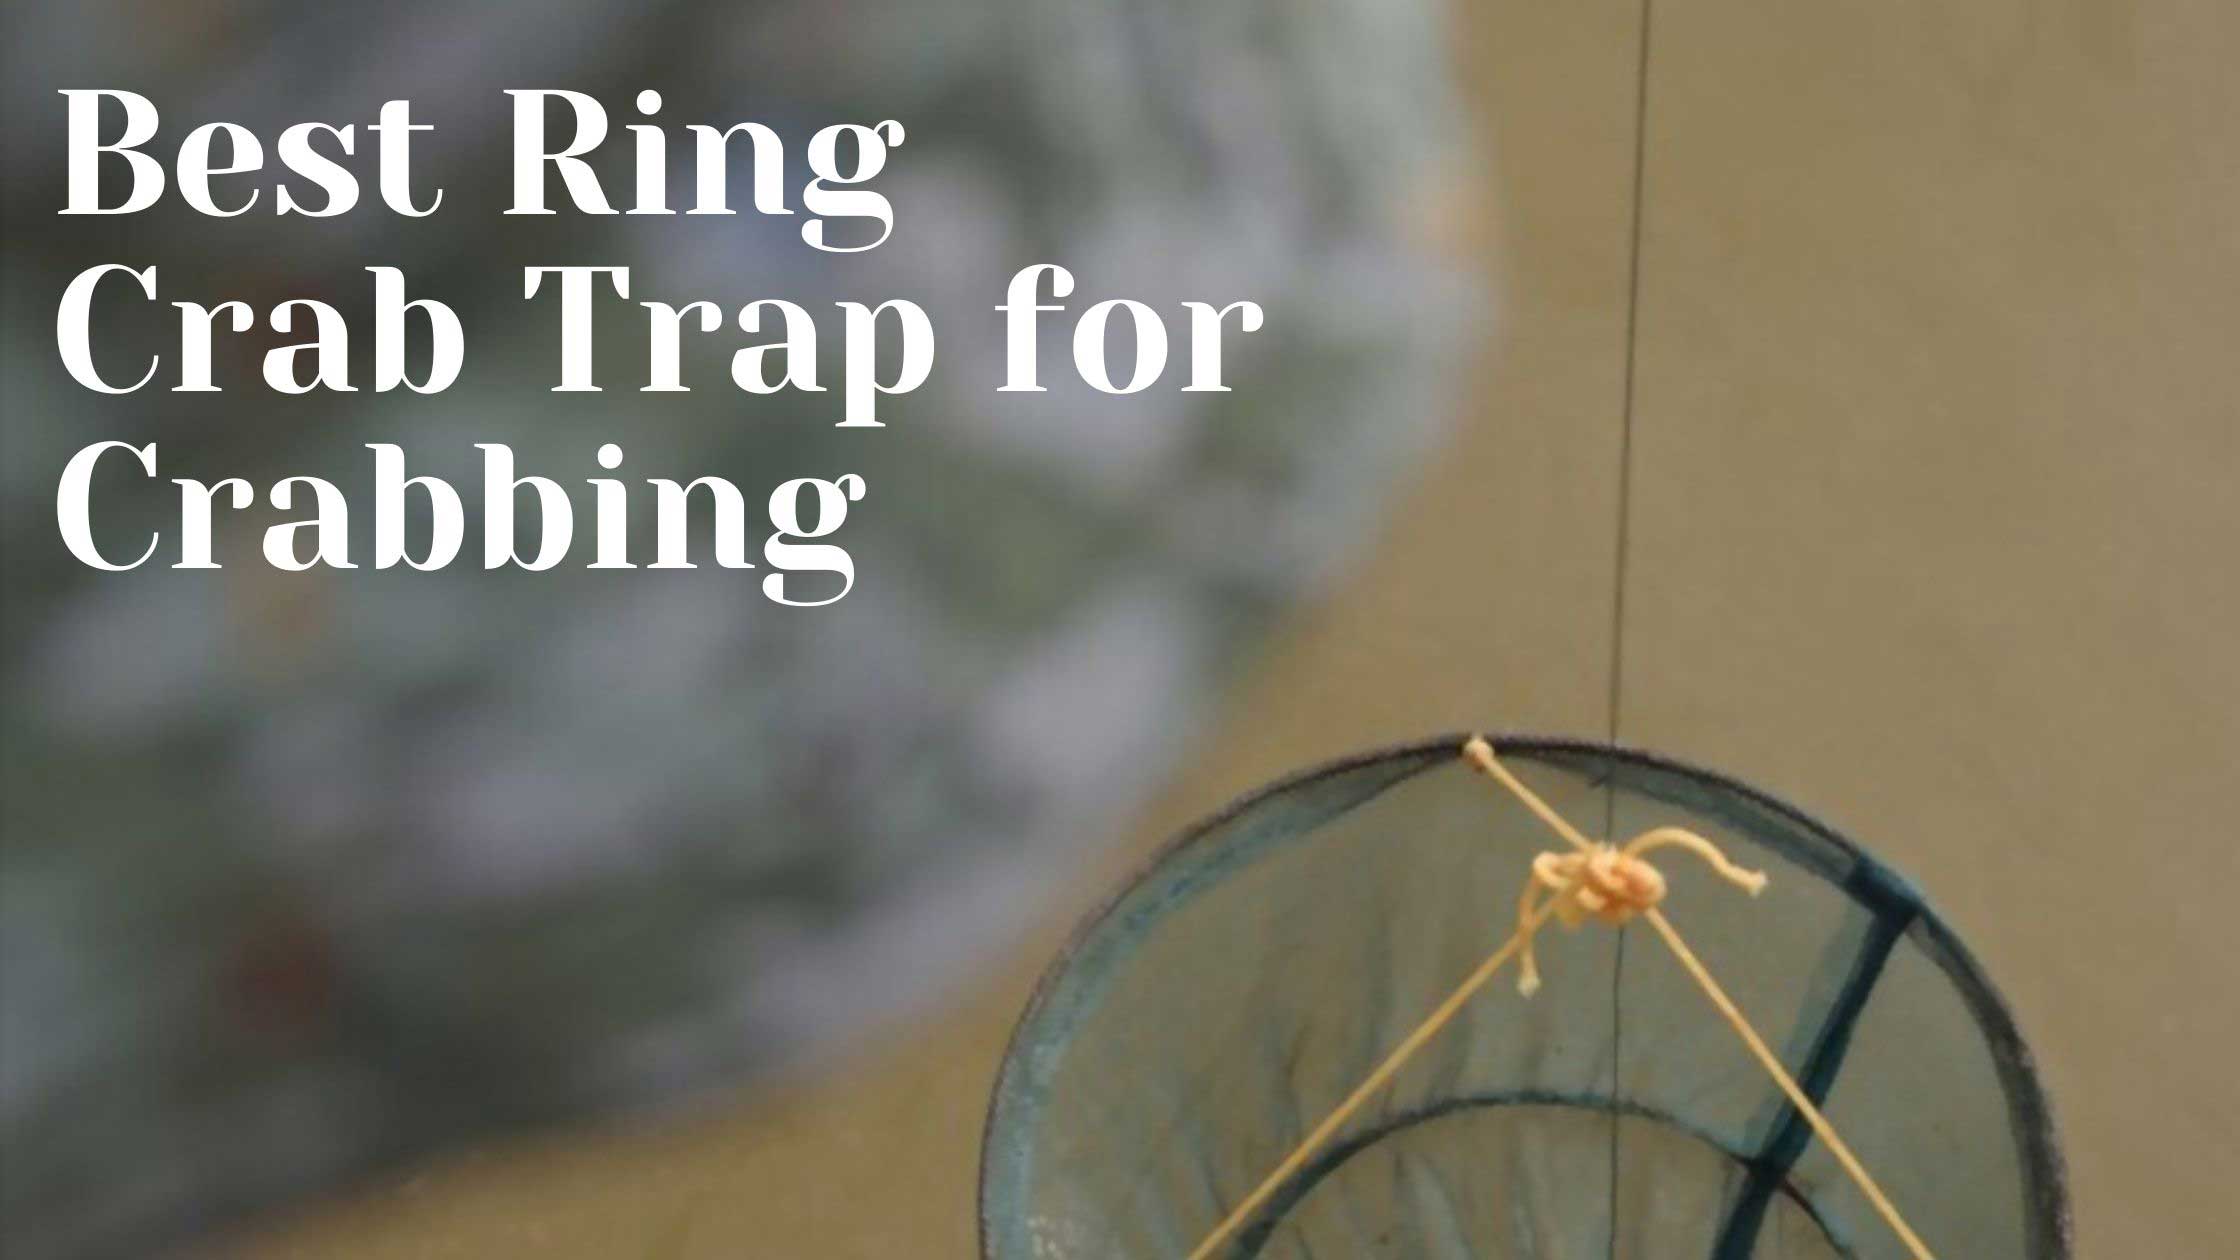 Best Ring Crab Trap